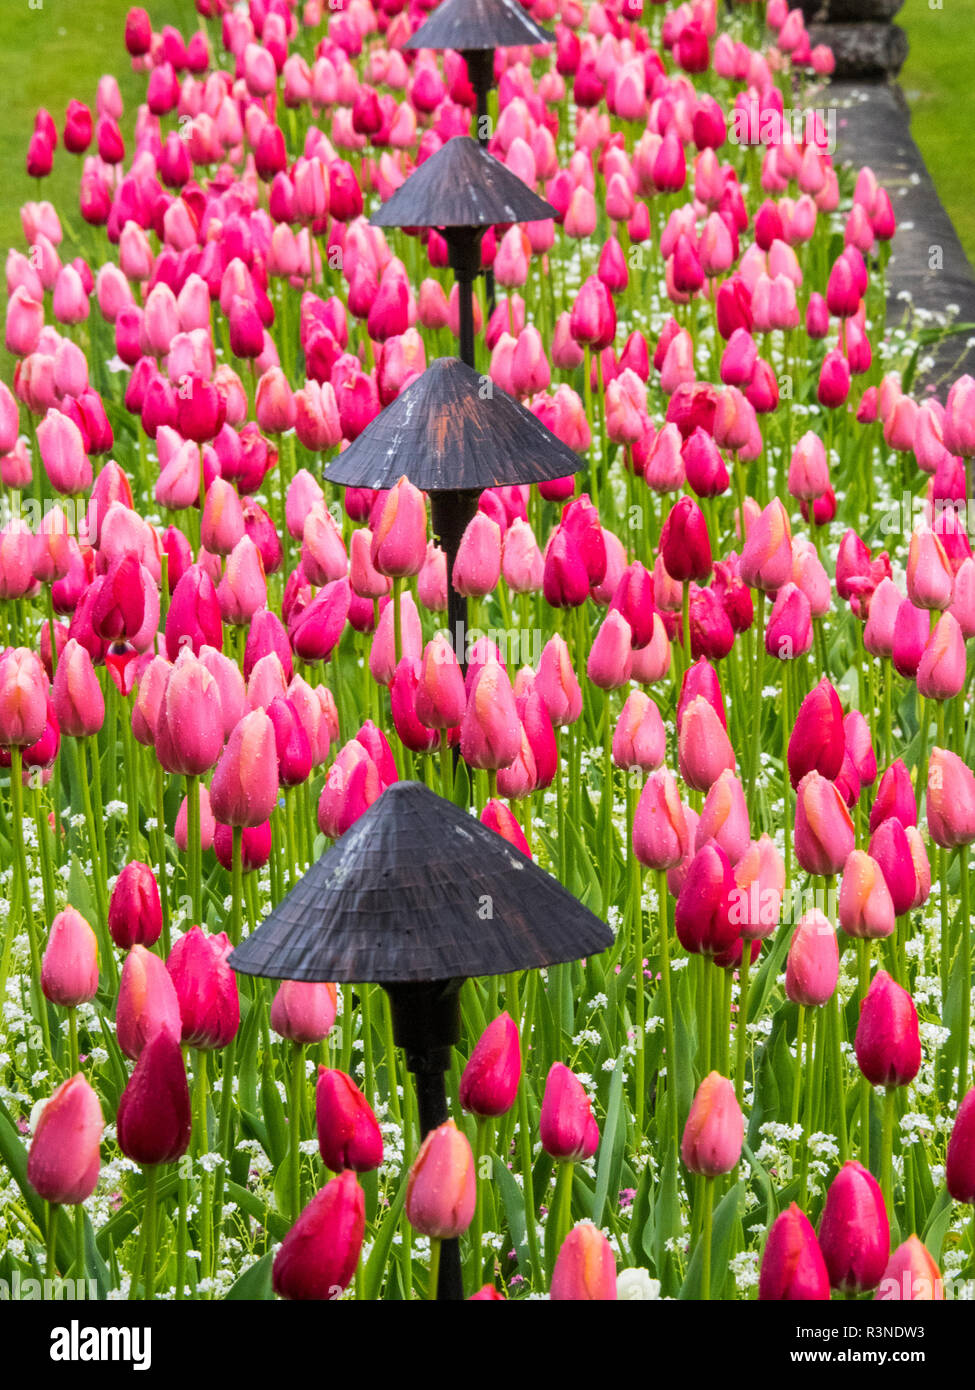 Tulips in mass planting Stock Photo